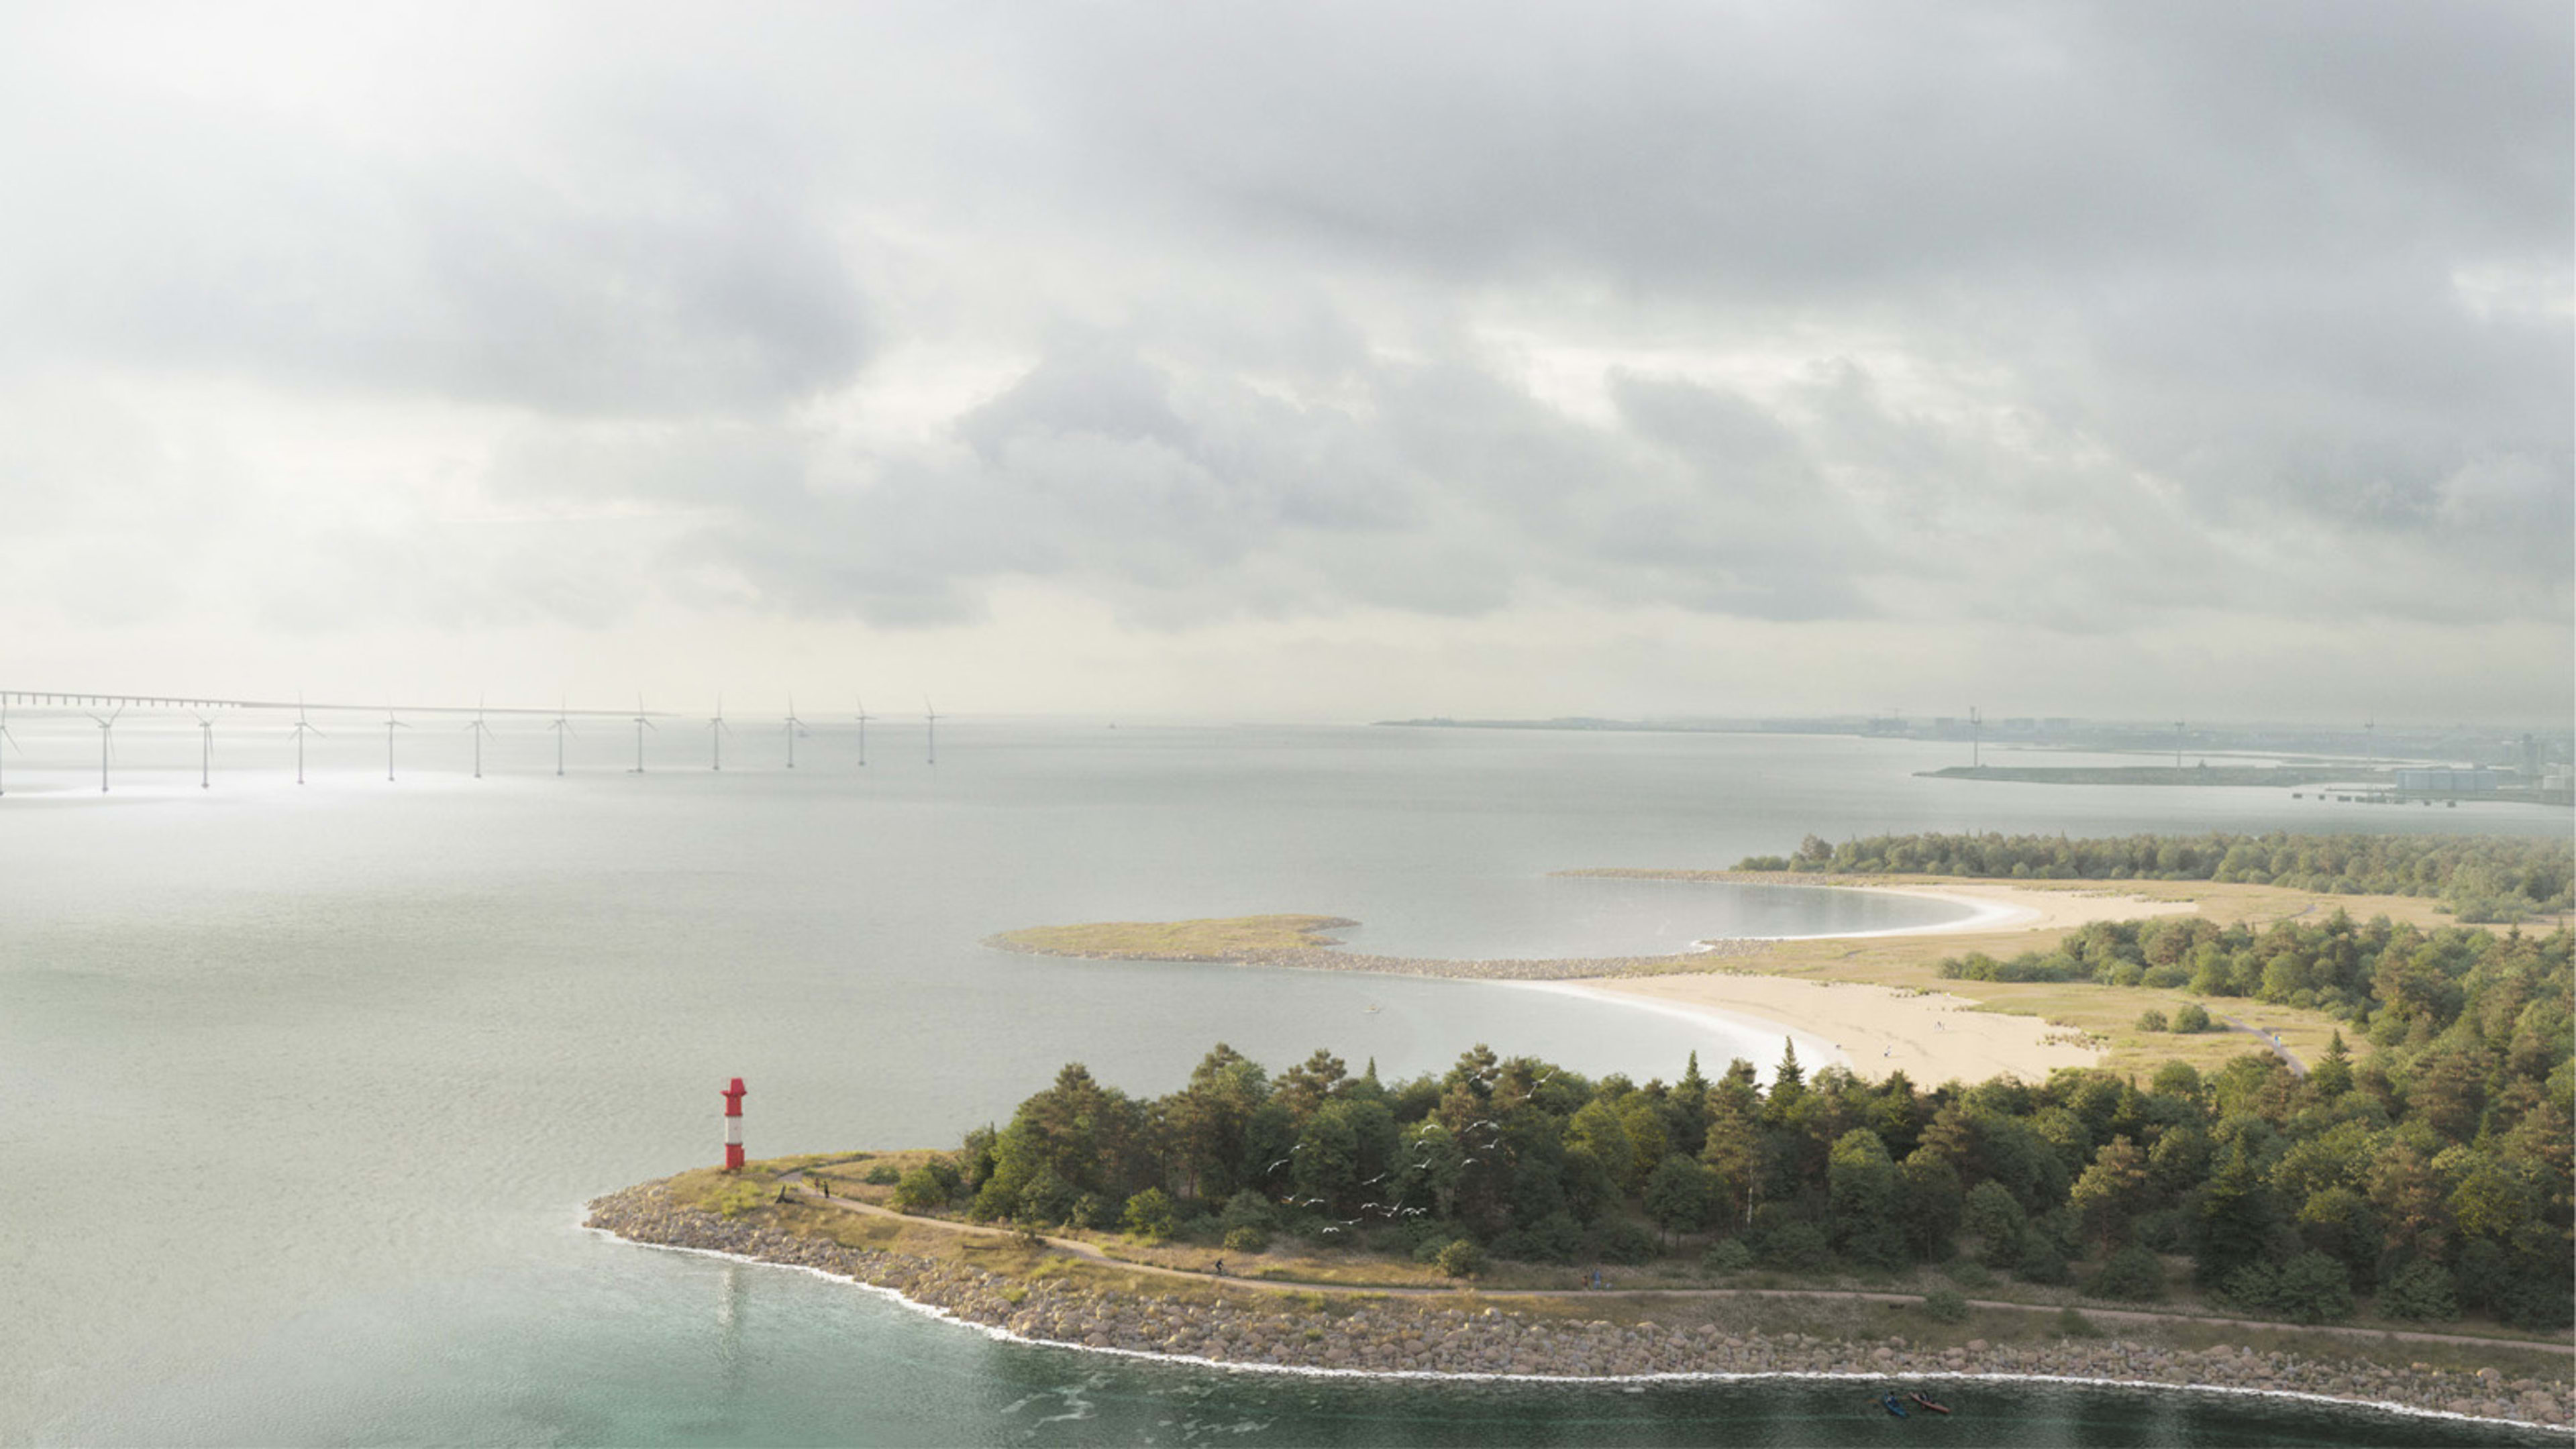 Copenhagen is building a huge island in its harbor to protect against sea level rise